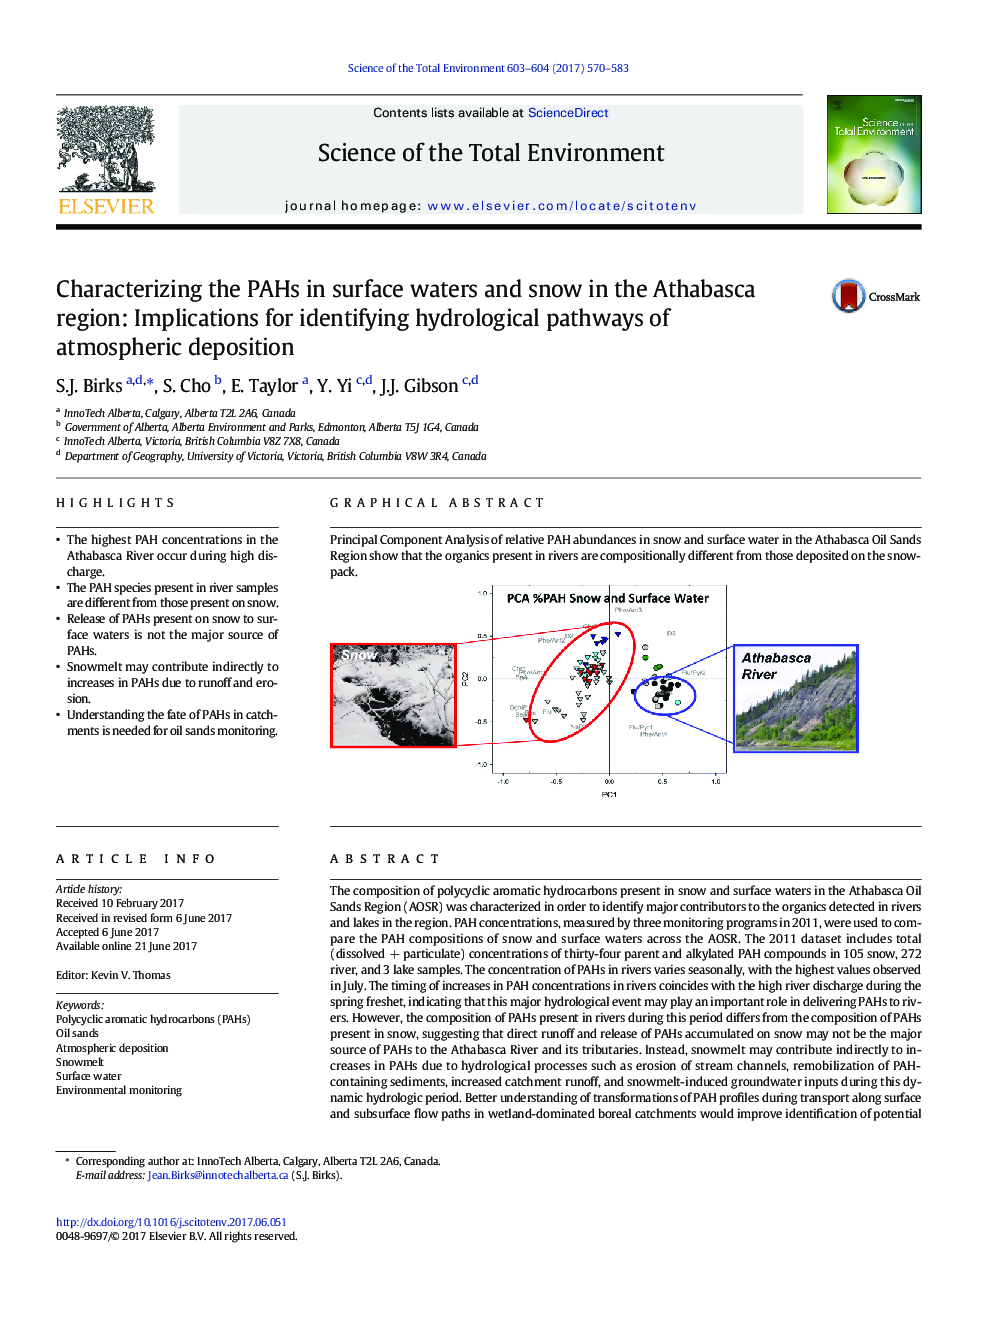 Characterizing the PAHs in surface waters and snow in the Athabasca region: Implications for identifying hydrological pathways of atmospheric deposition